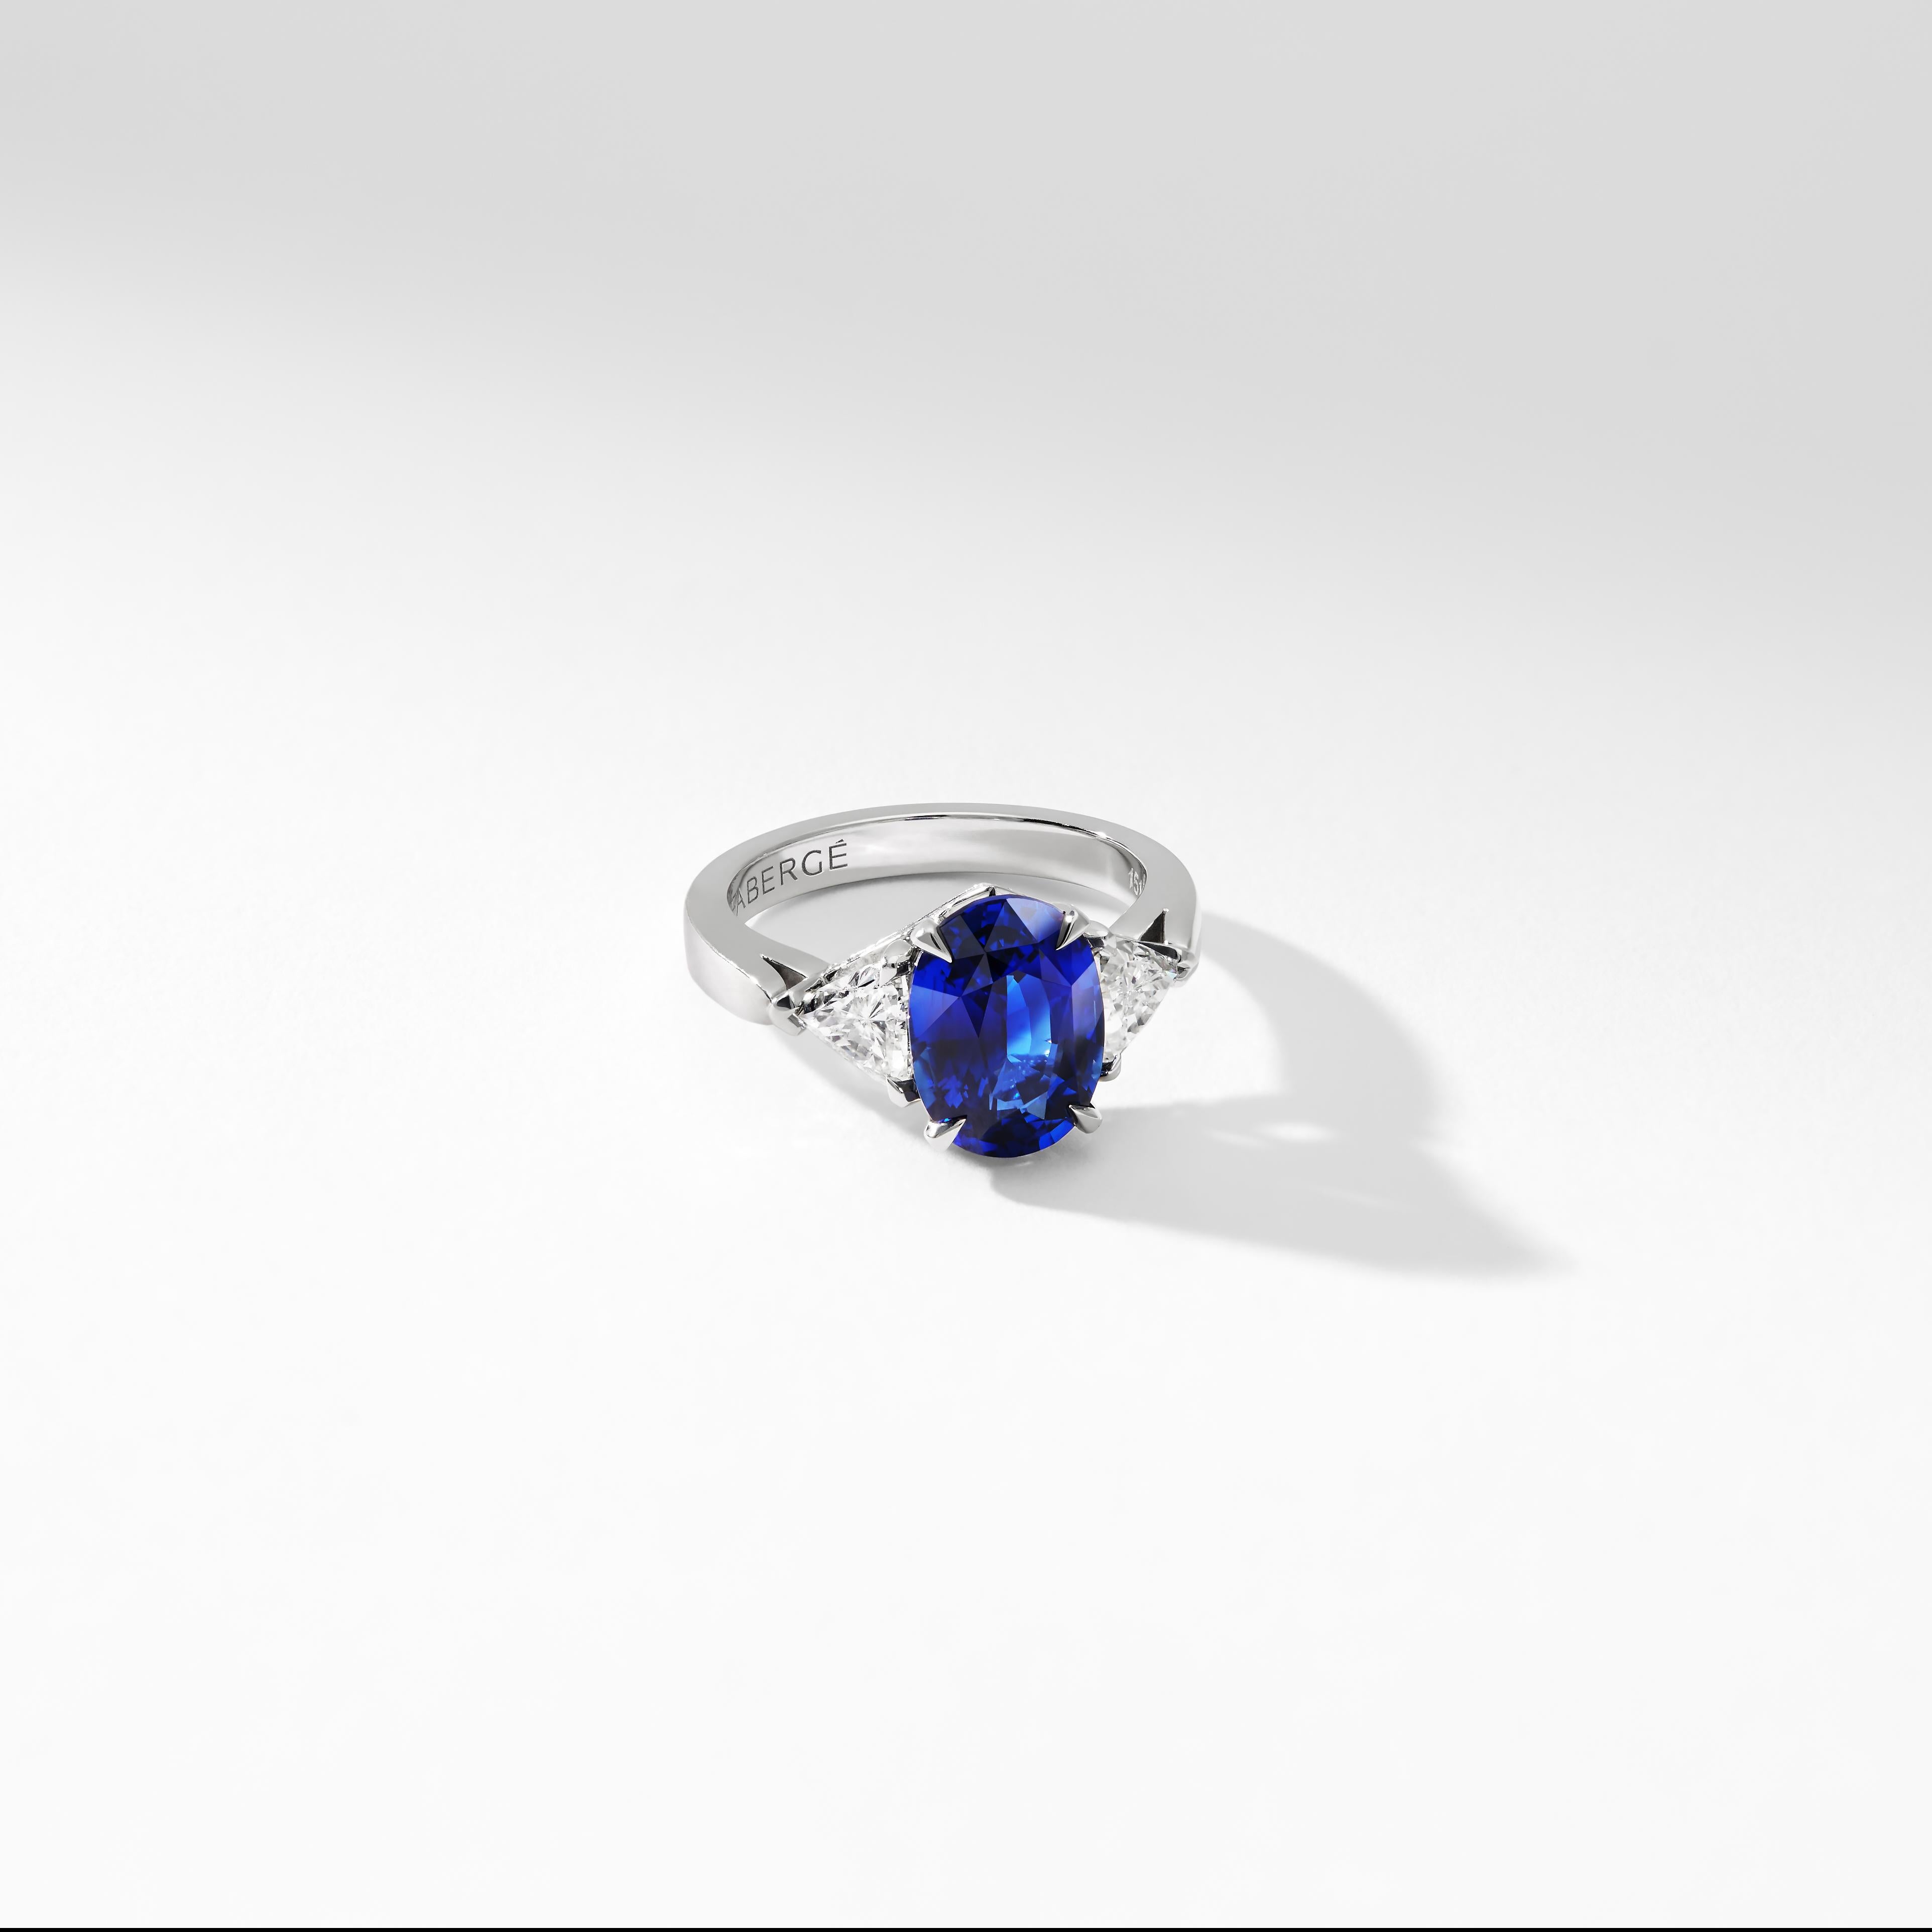 Women's Fabergé Platinum Oval 5.12ct Royal Blue Sapphire Ring Set With White Diamonds For Sale